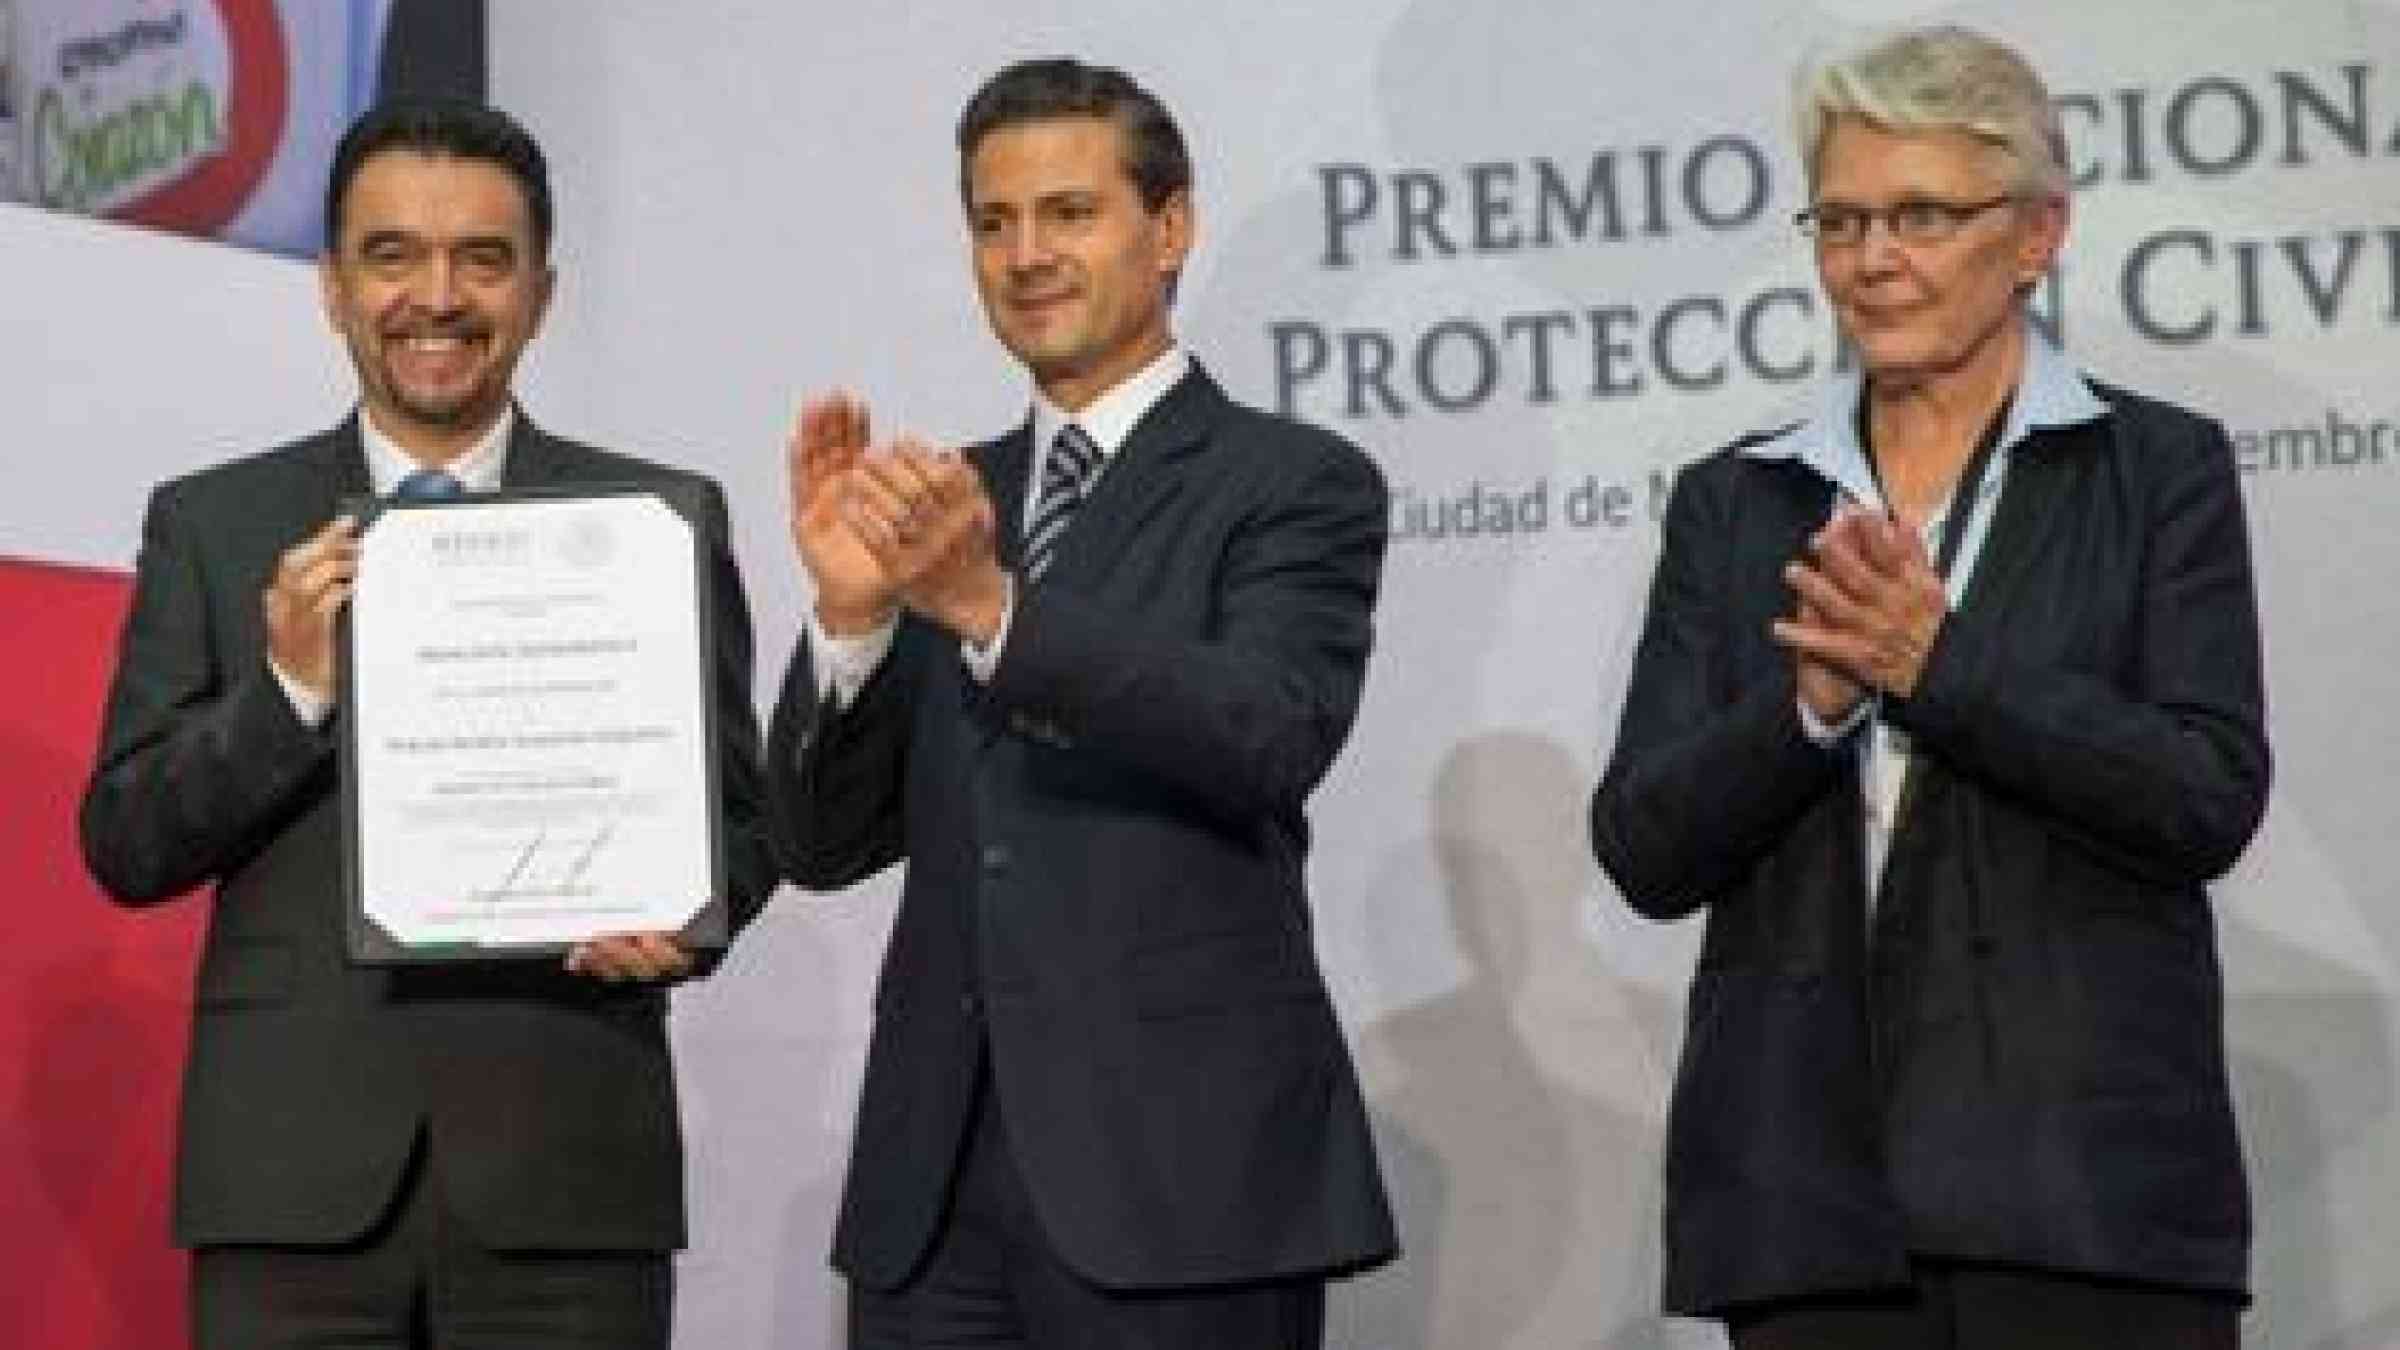 The President of Mexico, Mr. Enrique Peña Nieto, (right) with the head of UNISDR, Ms. Margareta Wahlstrom, at the National Civil Protection Awards ceremony in Mexico City in September. (Photo: UNISDR)